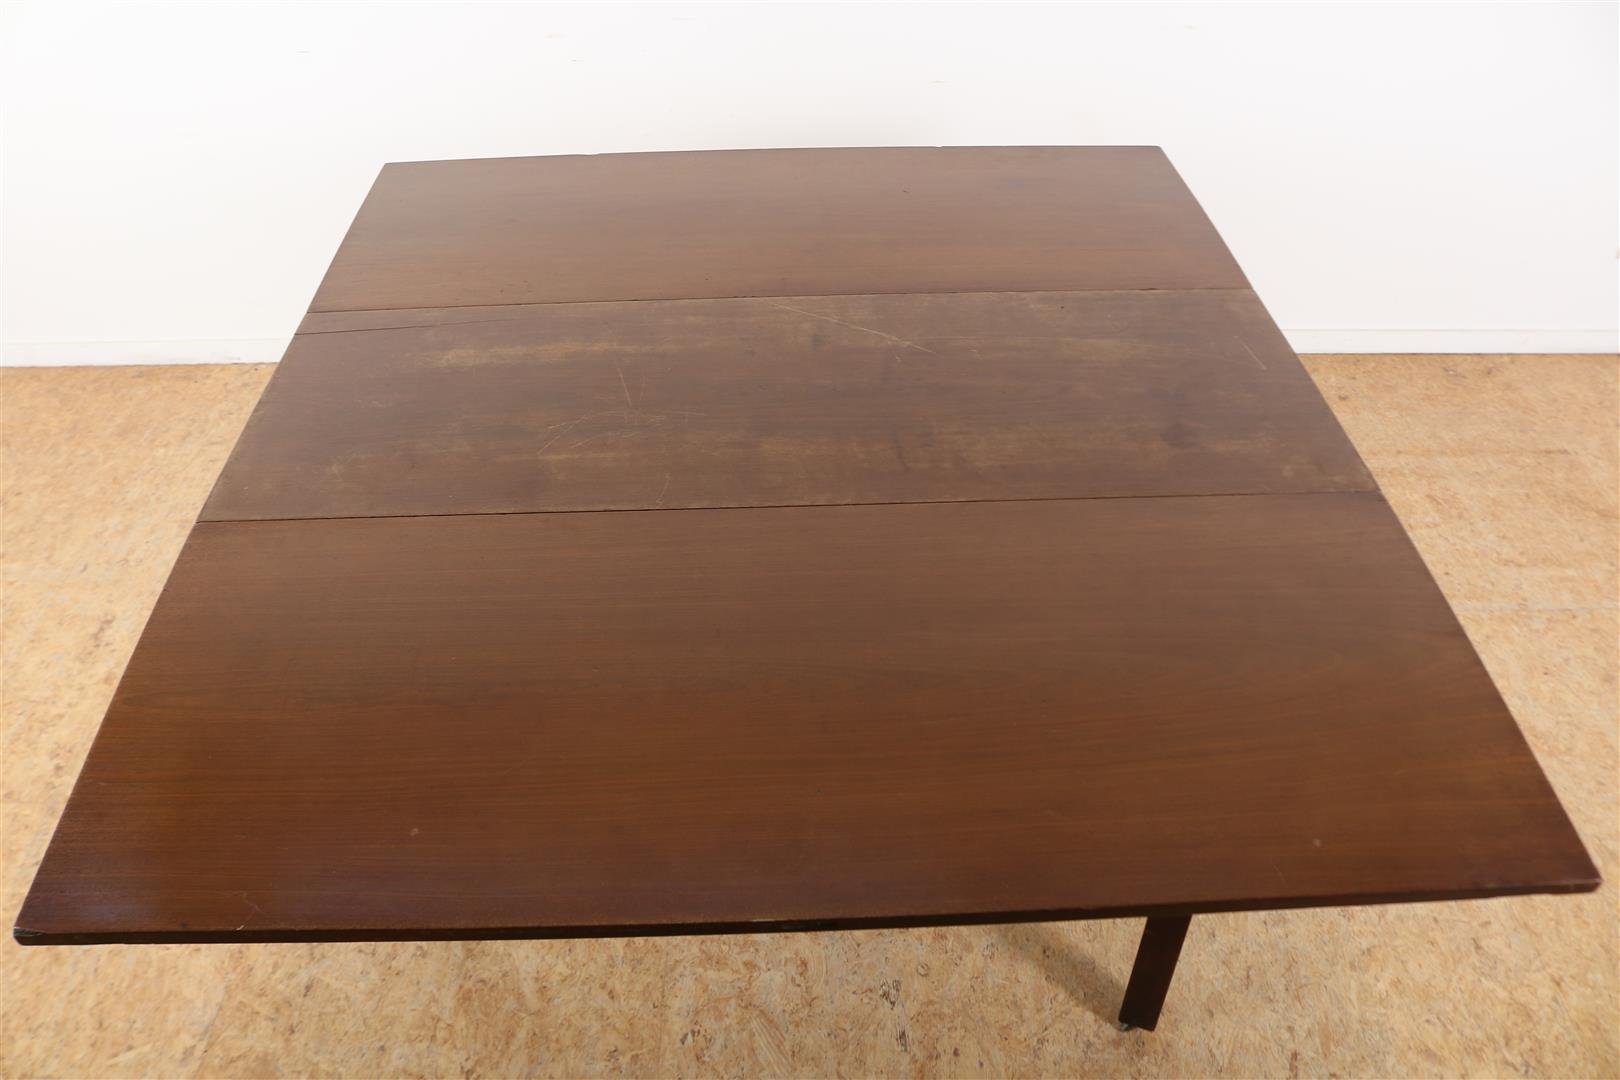 Mahogany drop-leaf table on block legs, 72 x 140 x 124 cm. (scratches on page) - Image 3 of 5